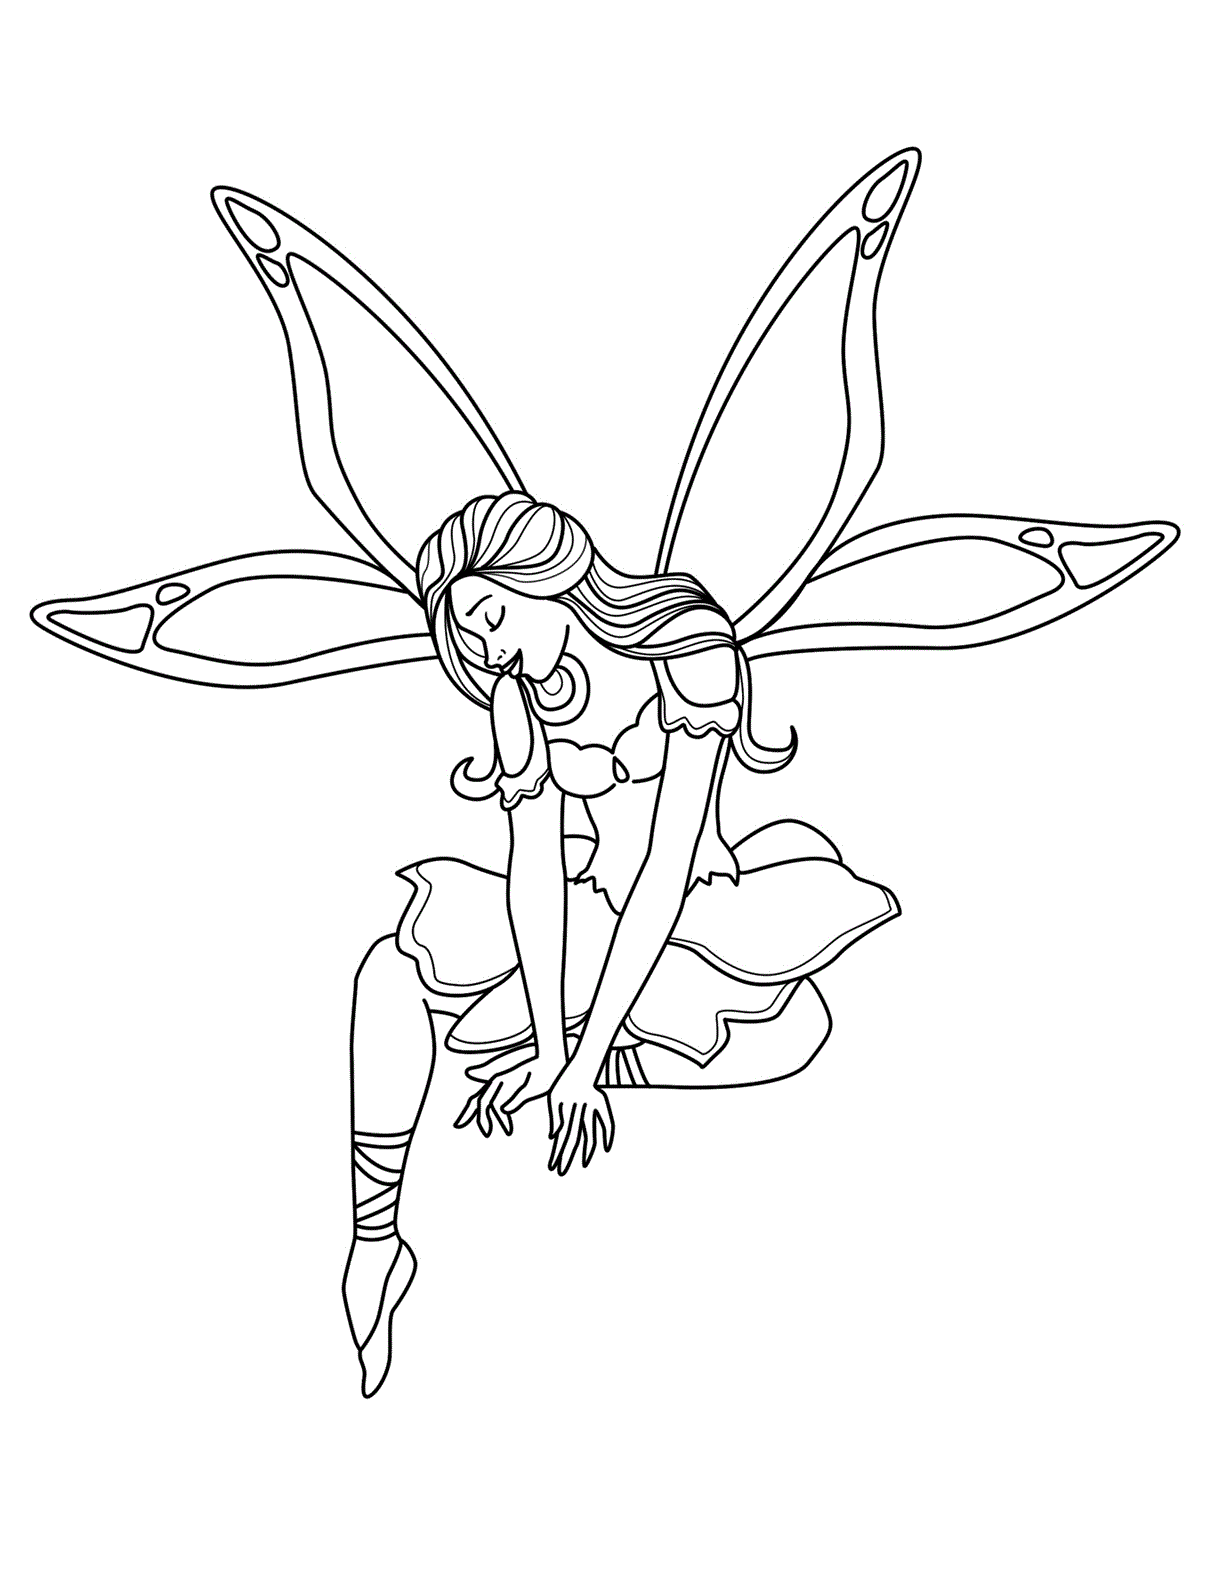 Free Printable Fairy Coloring Pages For Kids HD Wallpapers Download Free Images Wallpaper [wallpaper896.blogspot.com]